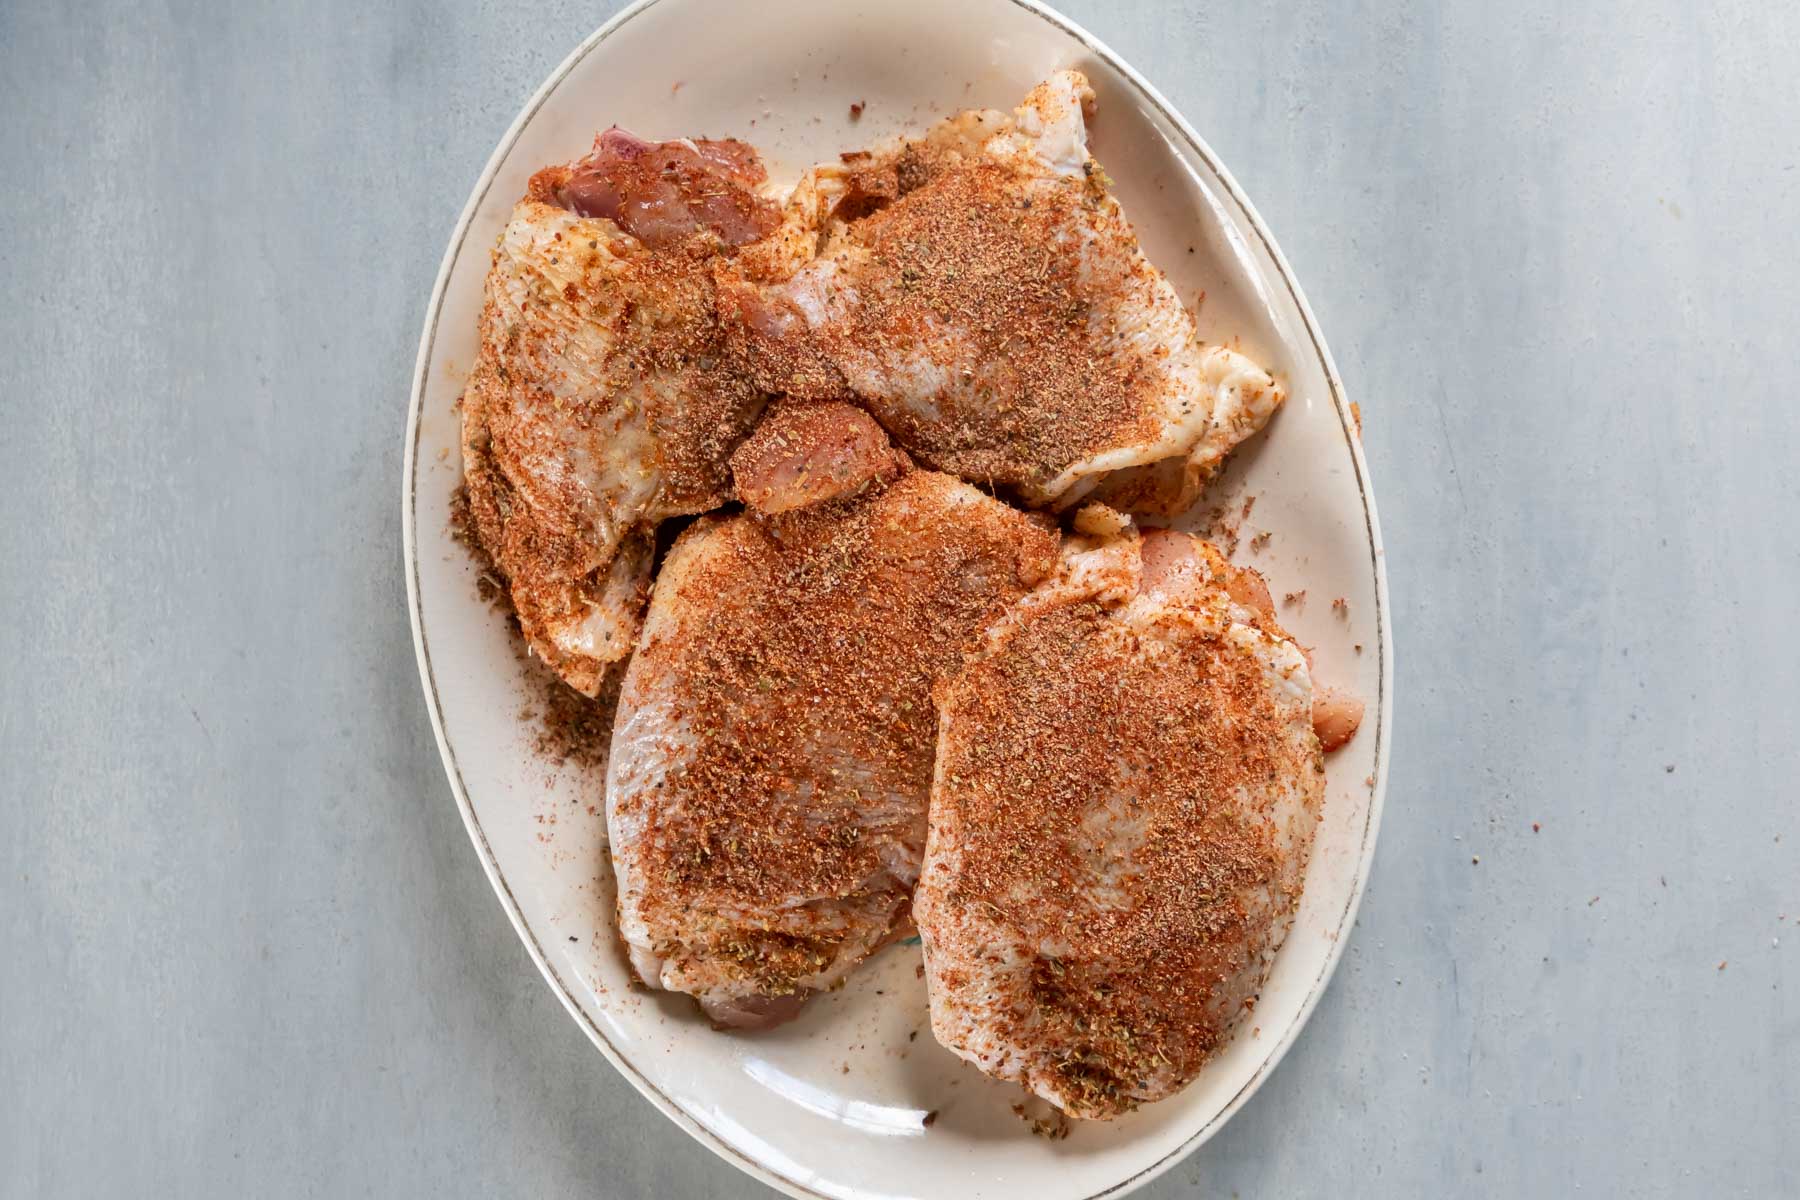 Seasonings rubbed onto 4 bone-in chicken thighs on a plate.